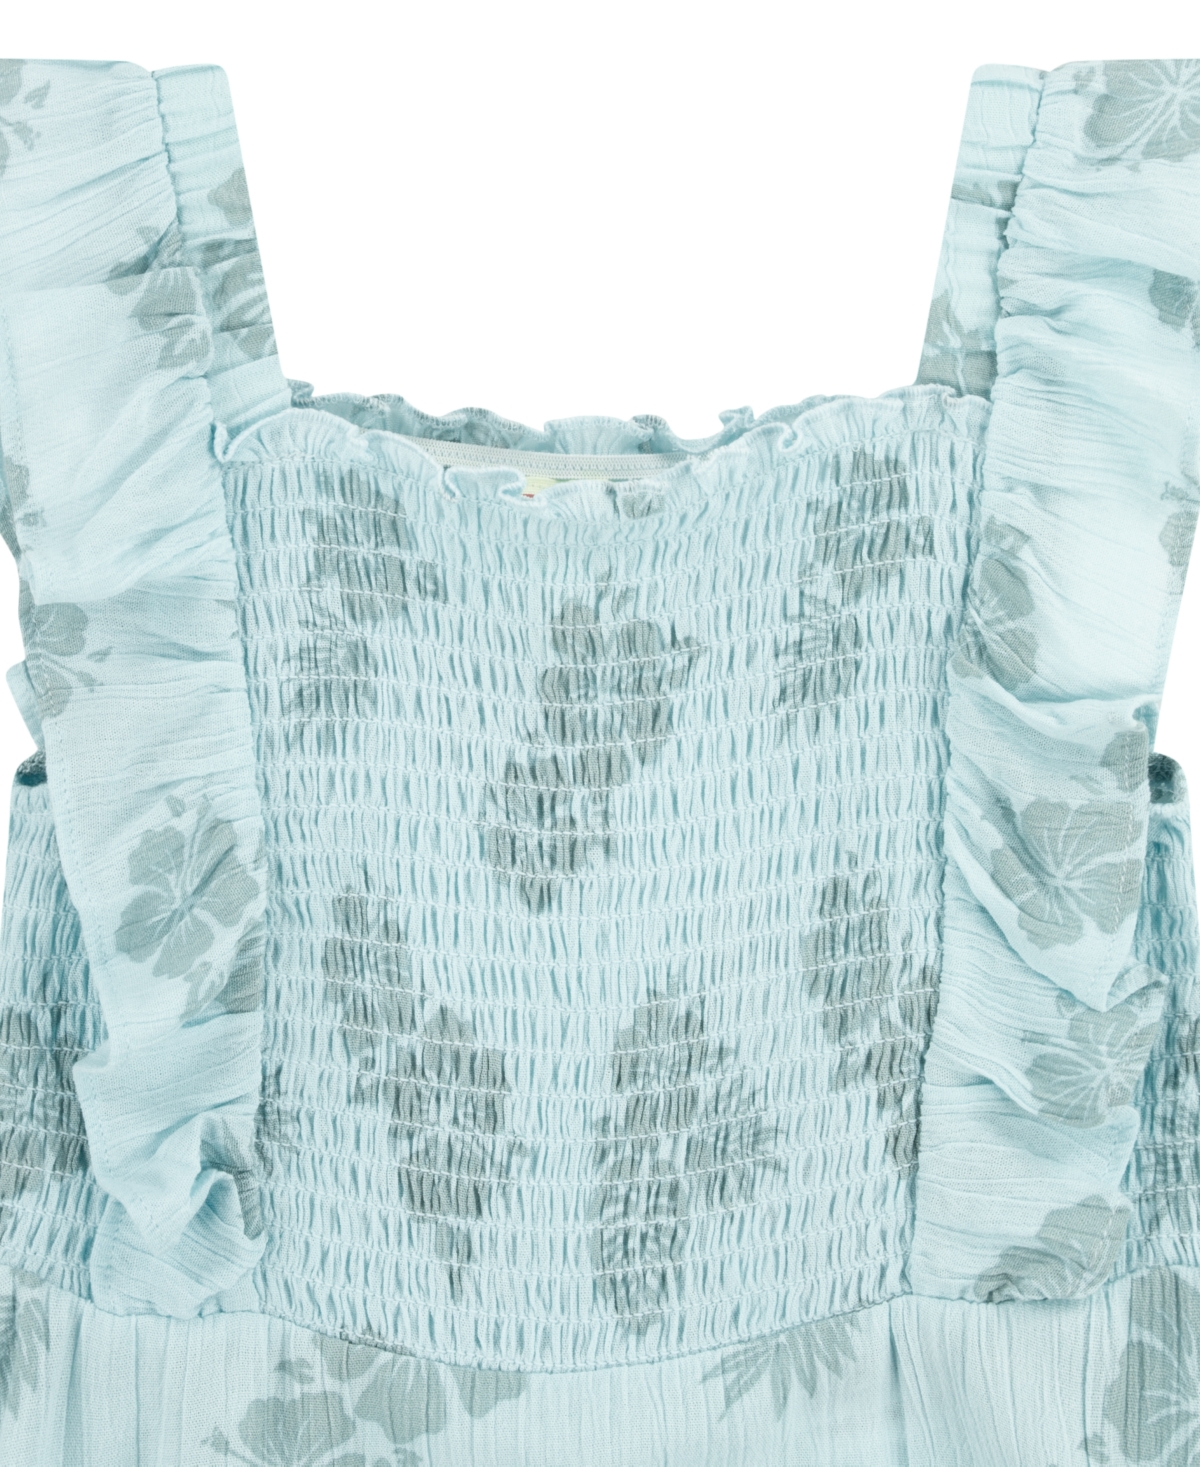 Shop Levi's Toddler Peplum Tank Top And Shorts Set In Icy Morn